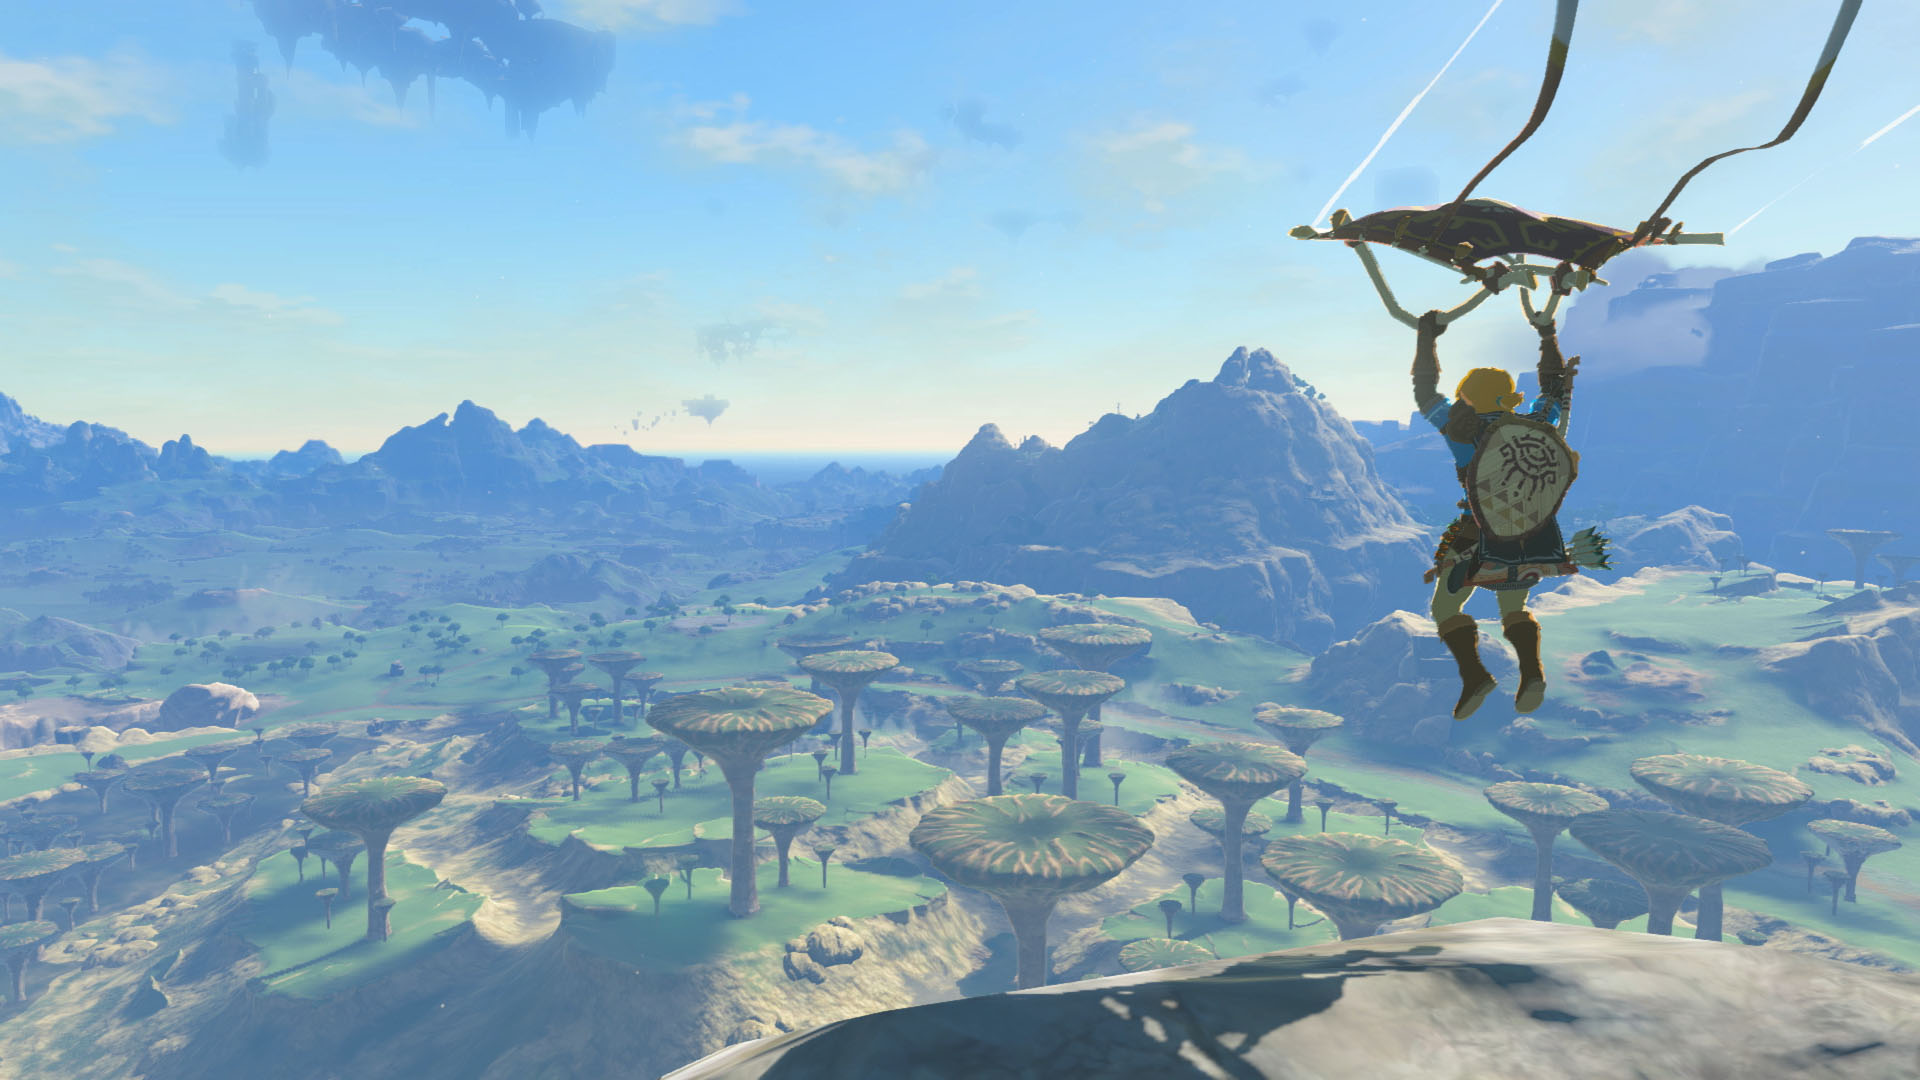 Zelda: Tears Of The Kingdom improved graphics shown in comparison pics